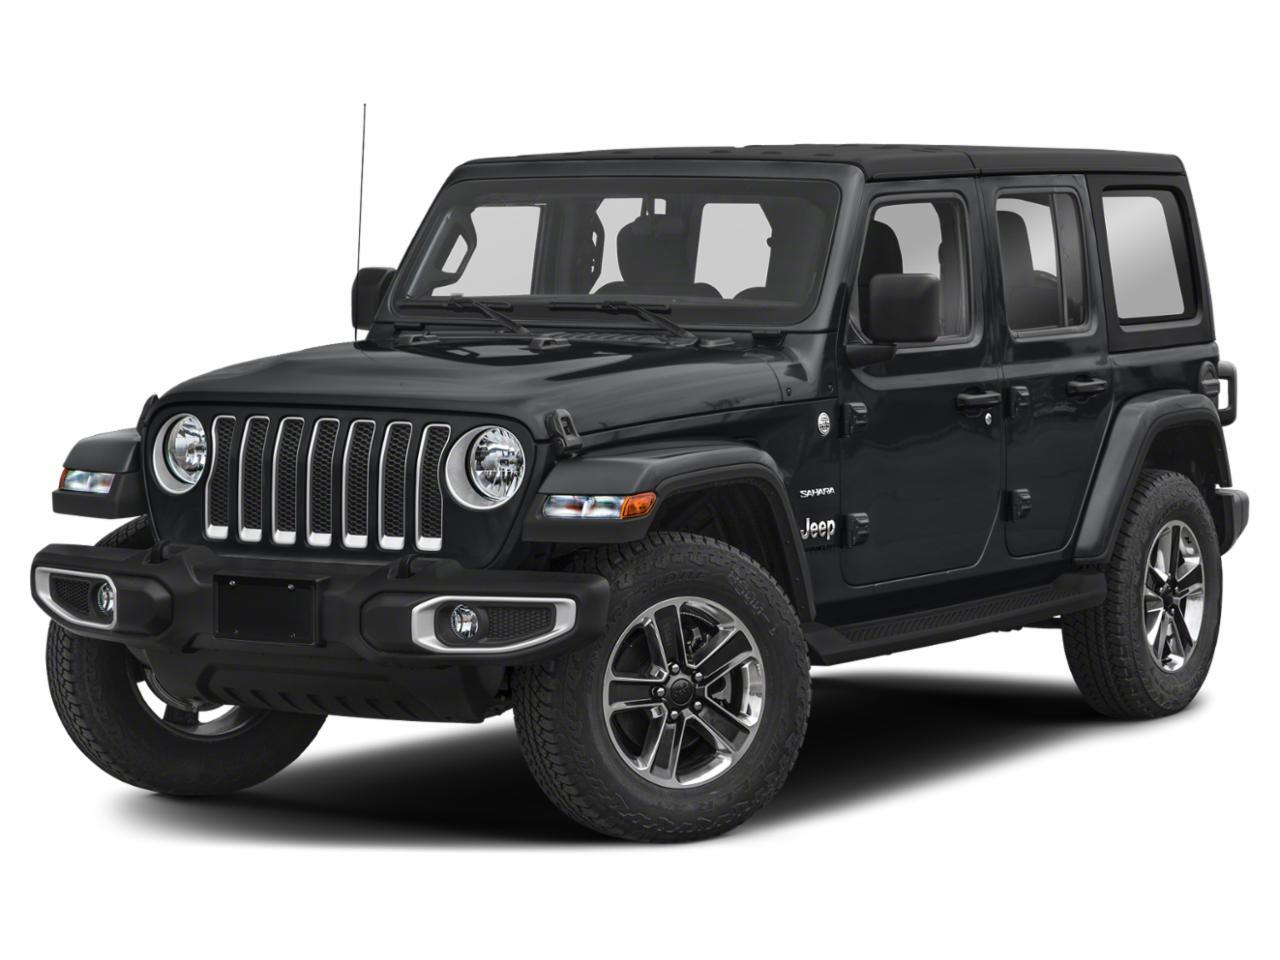 2020 Jeep WRANGLER UNLIMITED SAHARA UNLIMITED | 4X4 | AUTOMATIC |